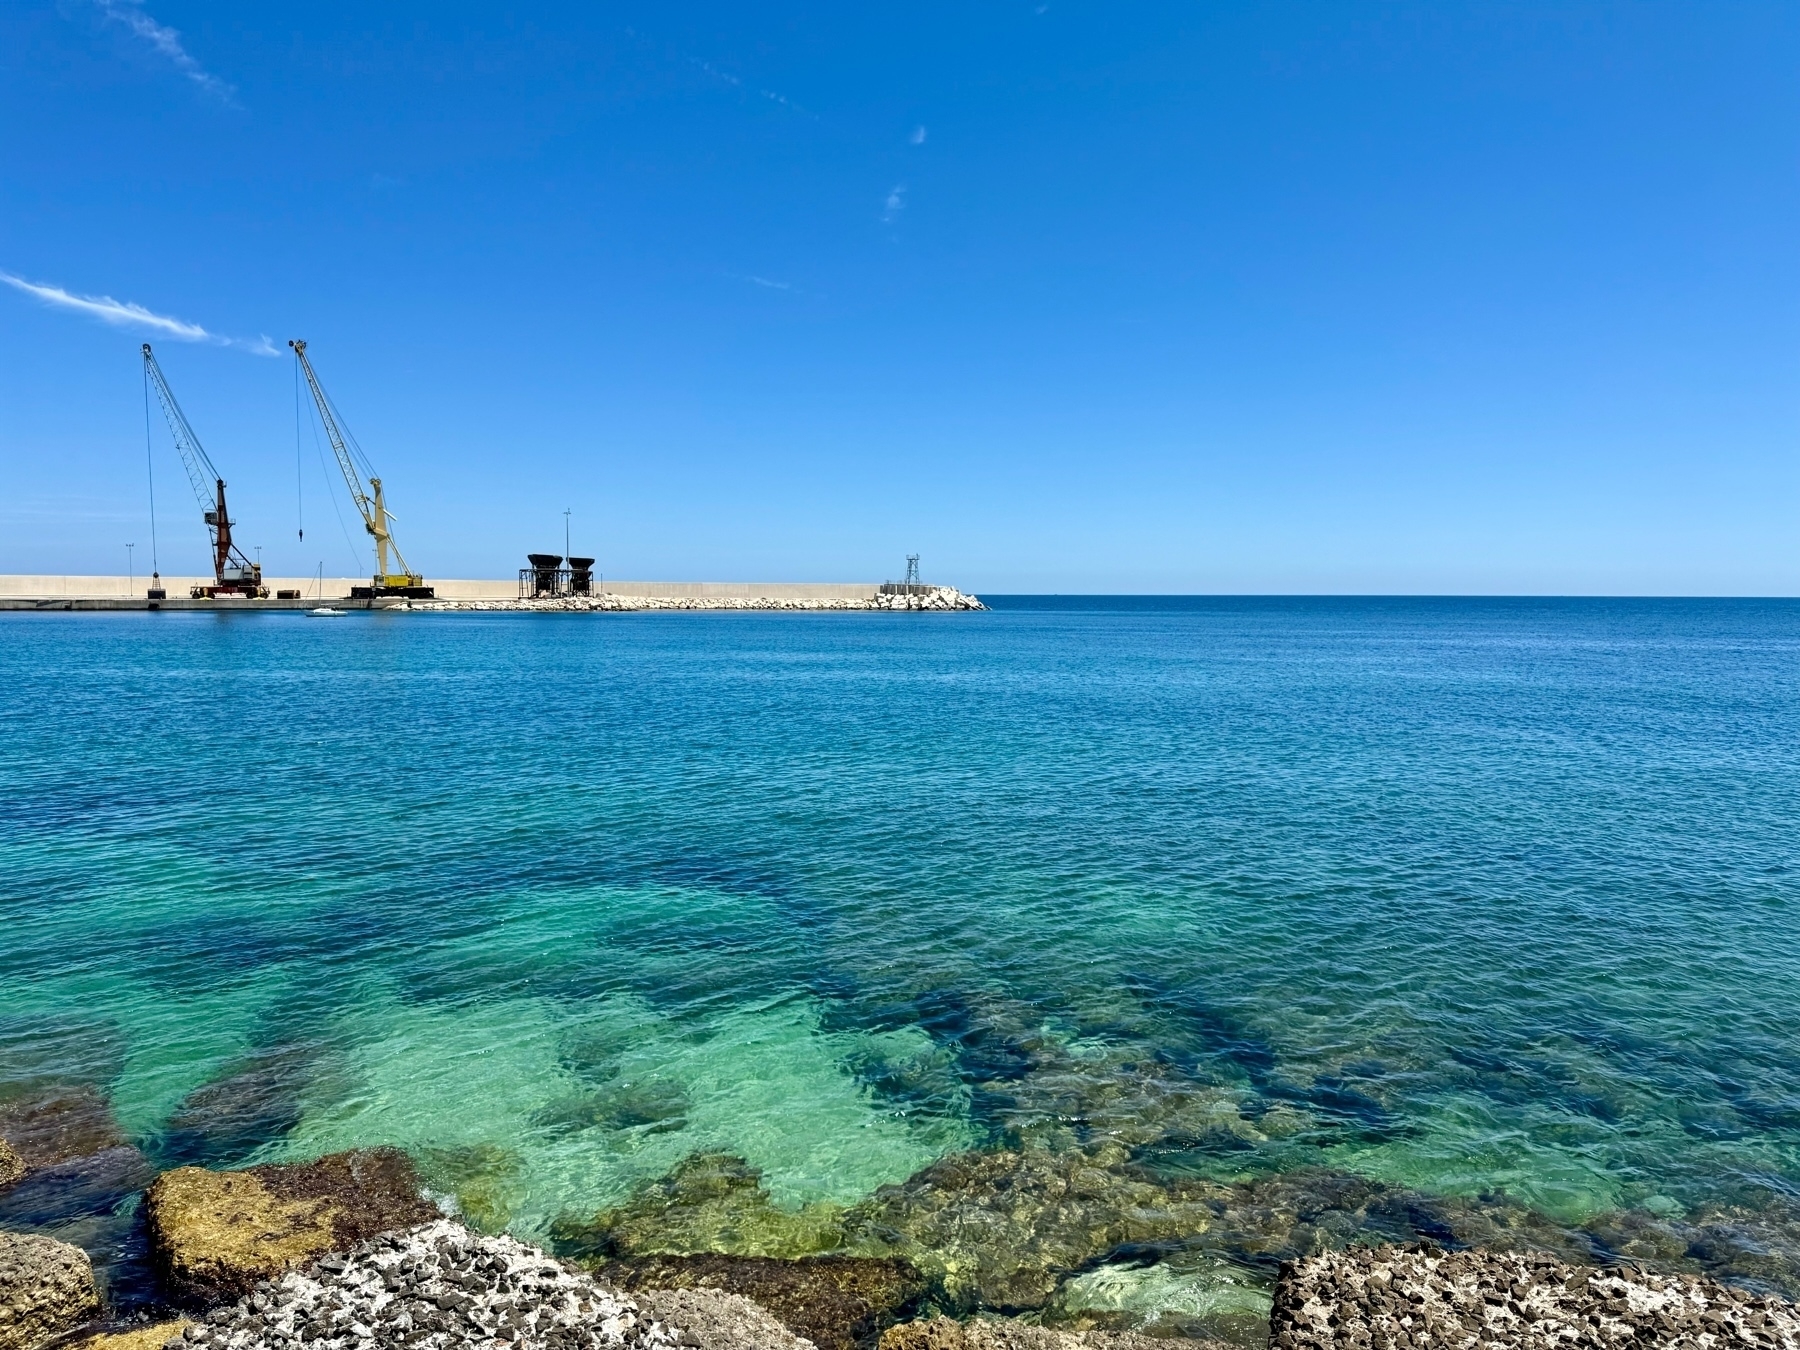 A scenic view of a harbor with crystal-clear turquoise water and a rocky shoreline. There are two cranes on the pier, extending into the blue sky, which is clear with only a few wispy clouds. The horizon line separates the sea from the sky. 